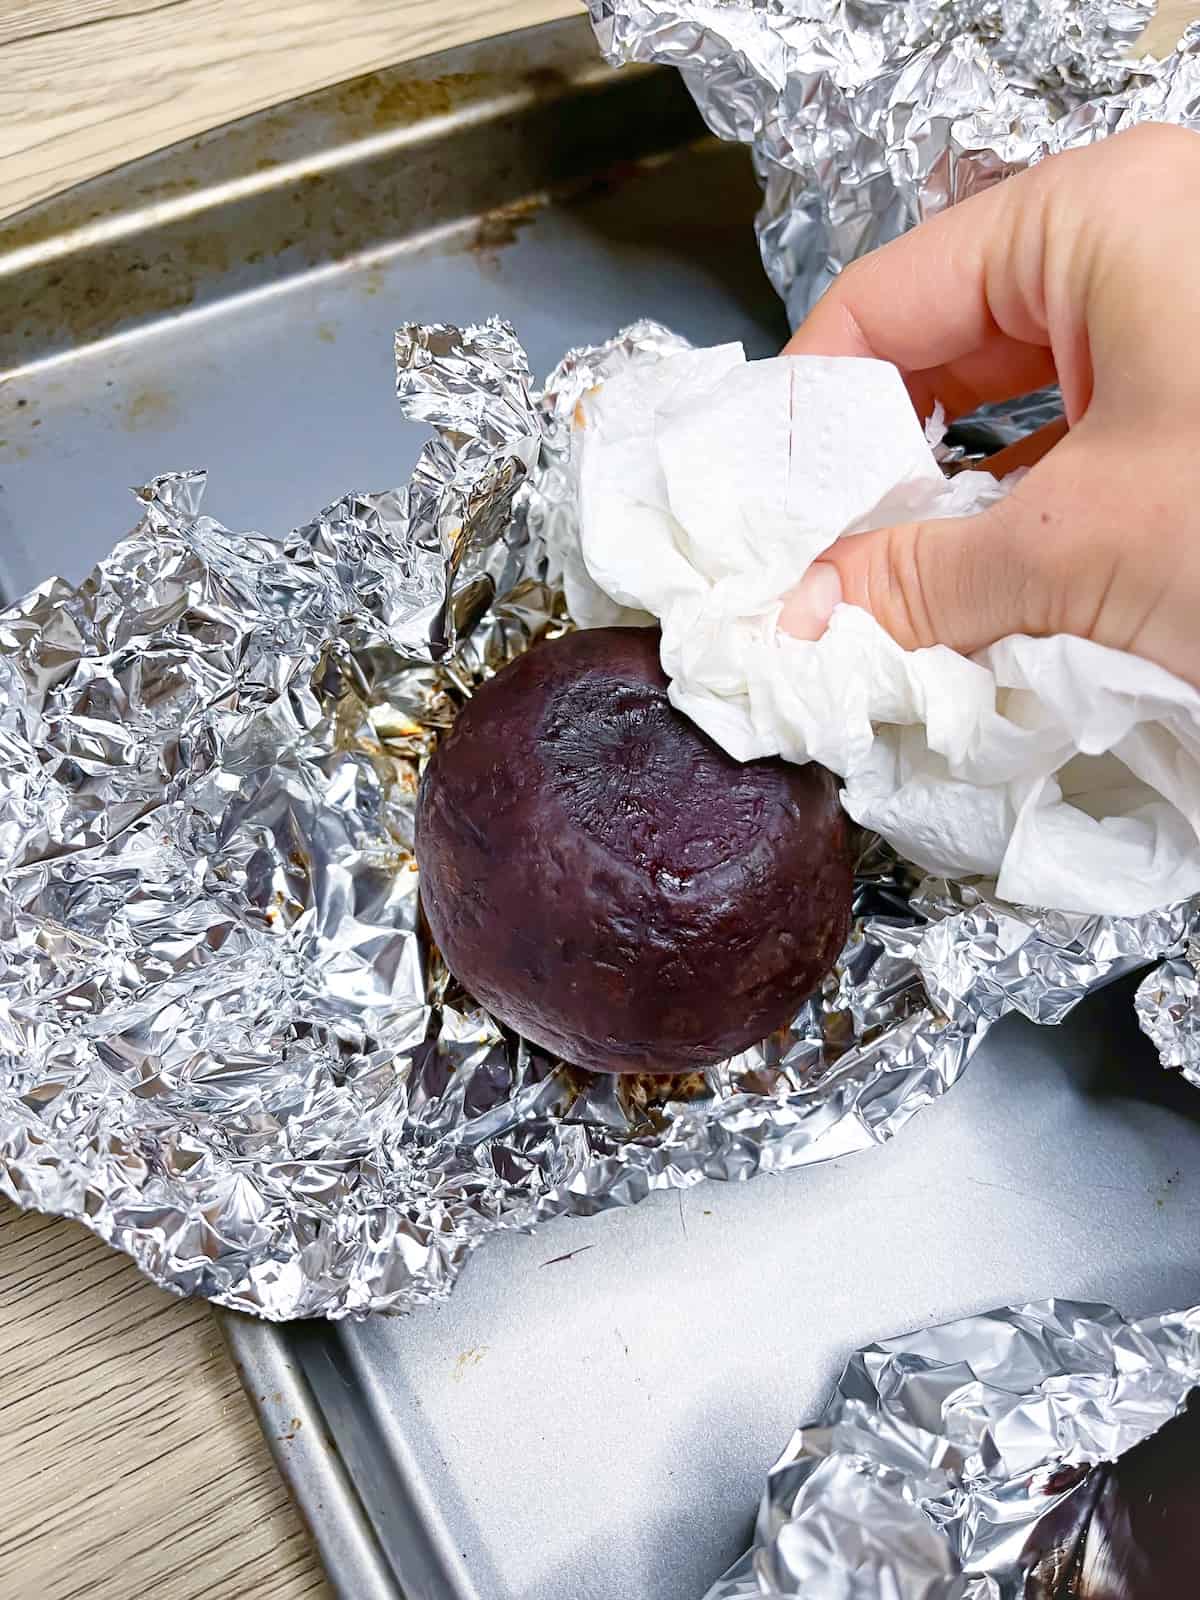 A hand holding a paper towel to take the skin off of roasted beets in foil